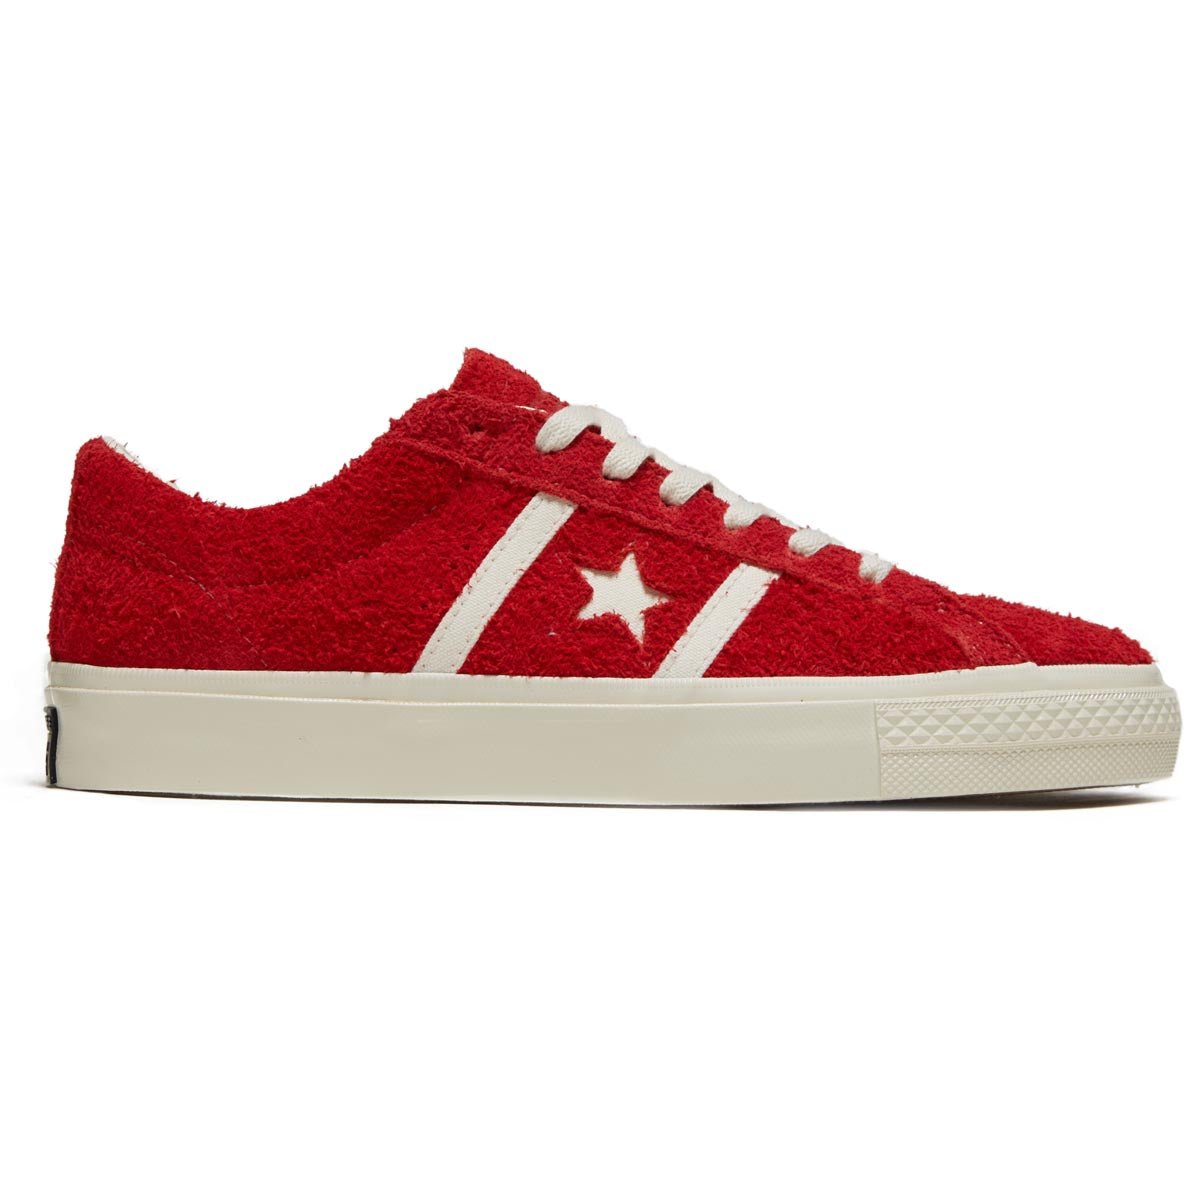 Converse One Star Academy Pro Shoes - Red/Egret/Egret image 1